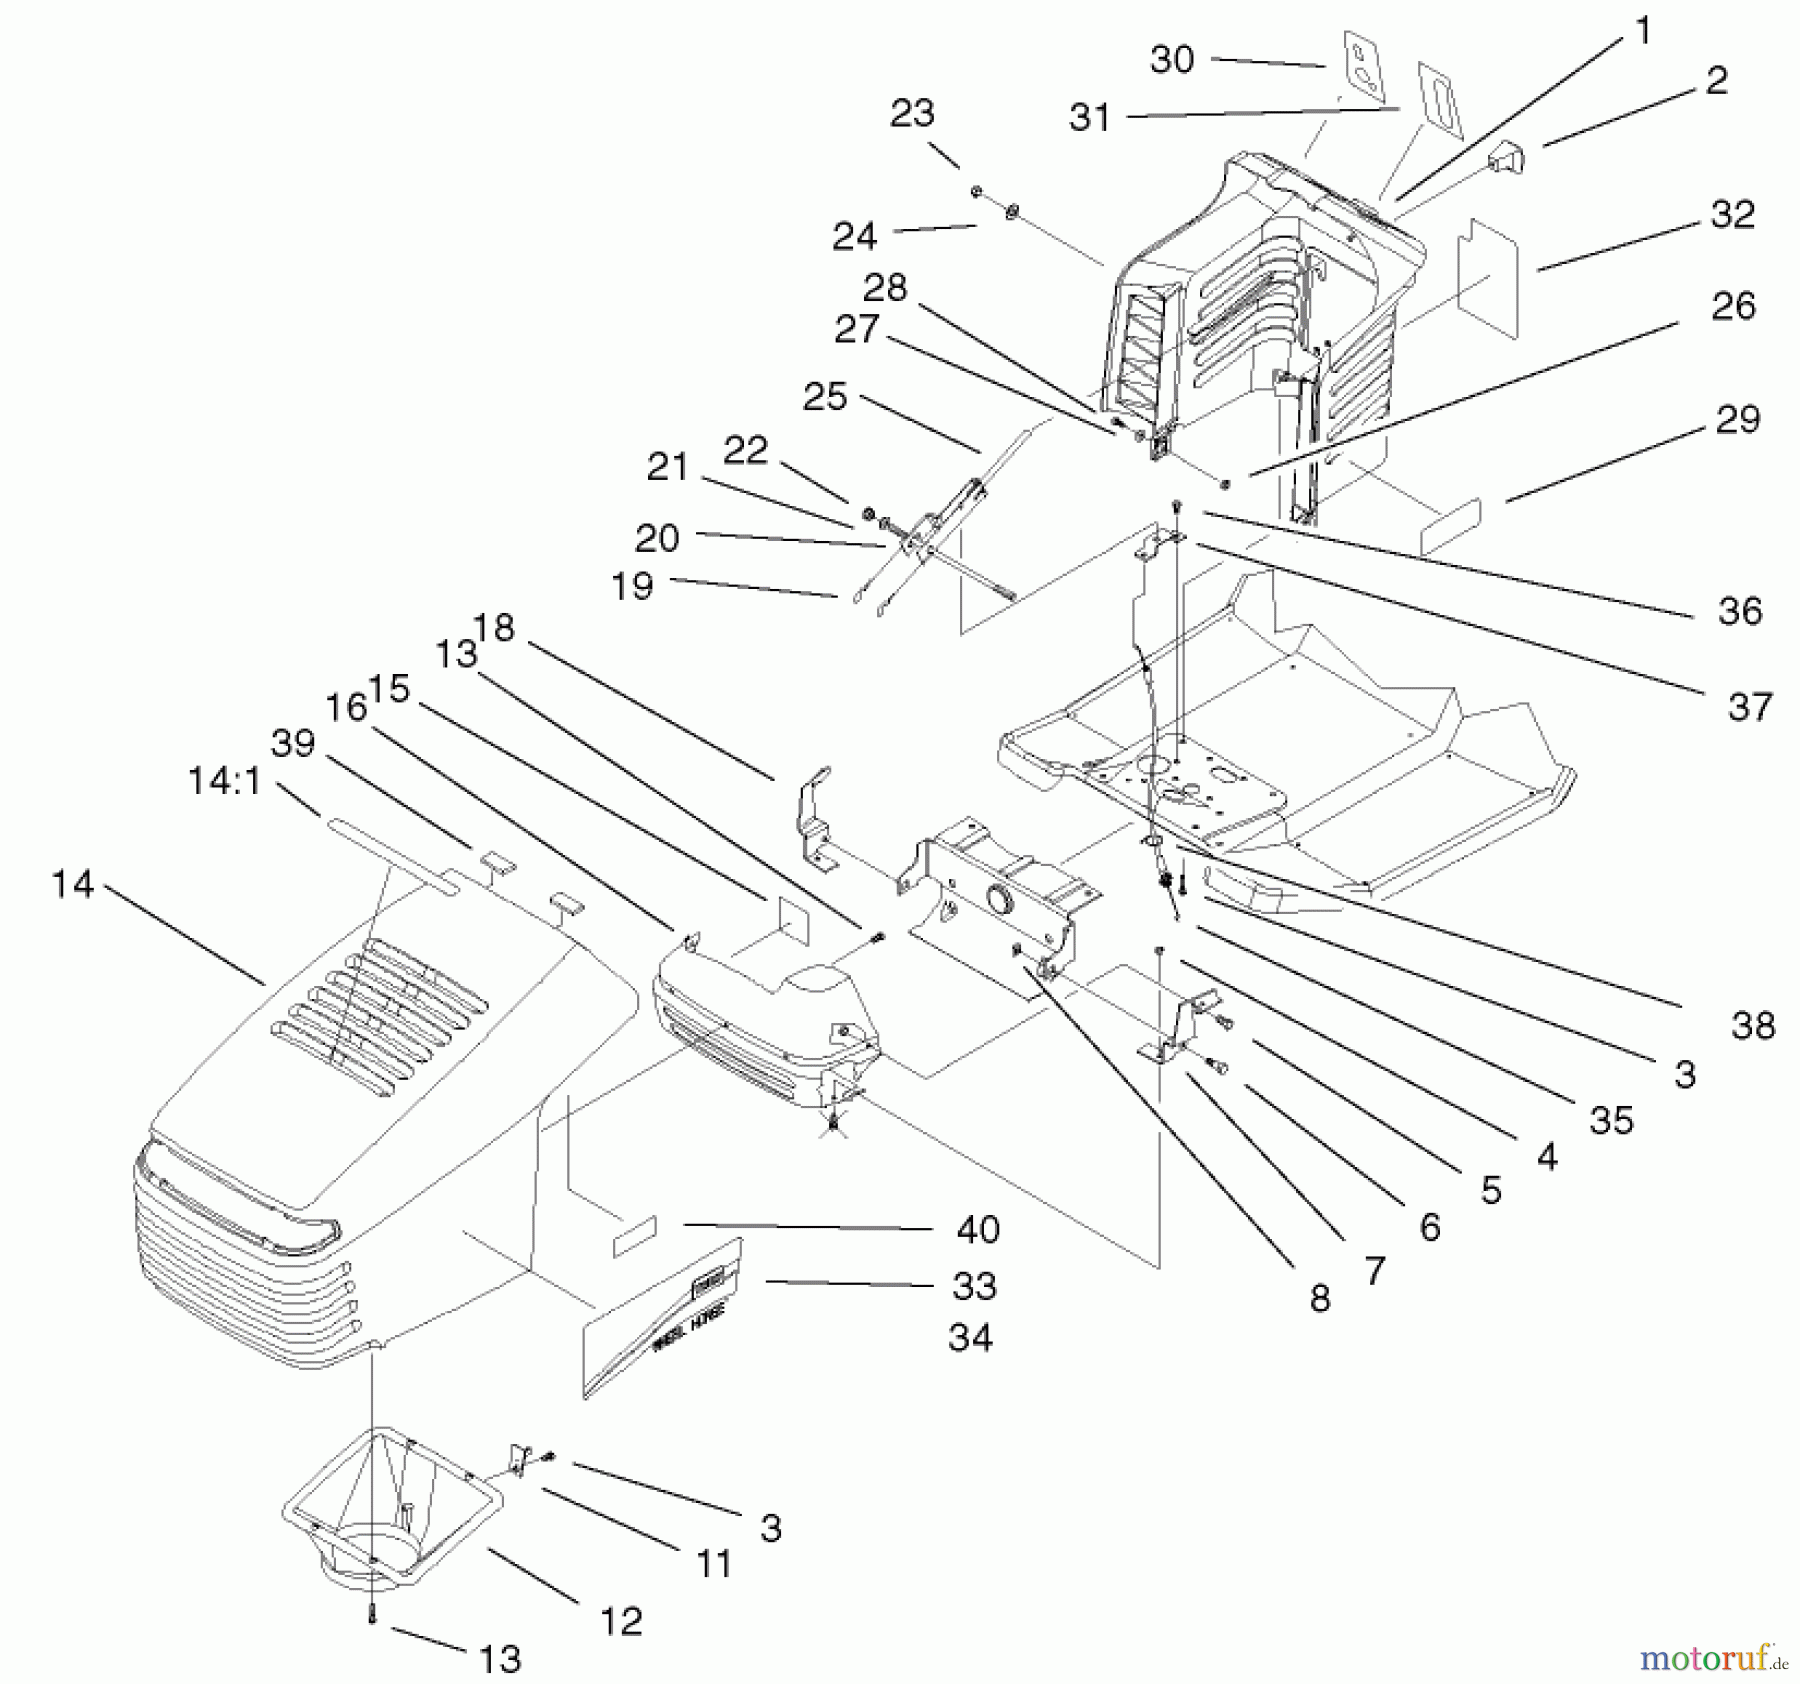  Toro Neu Mowers, Lawn & Garden Tractor Seite 1 71228 (17-44HXL) - Toro 17-44HXL Lawn Tractor, 2001 (210000001-210999999) HOOD AND TOWER ASSEMBLY